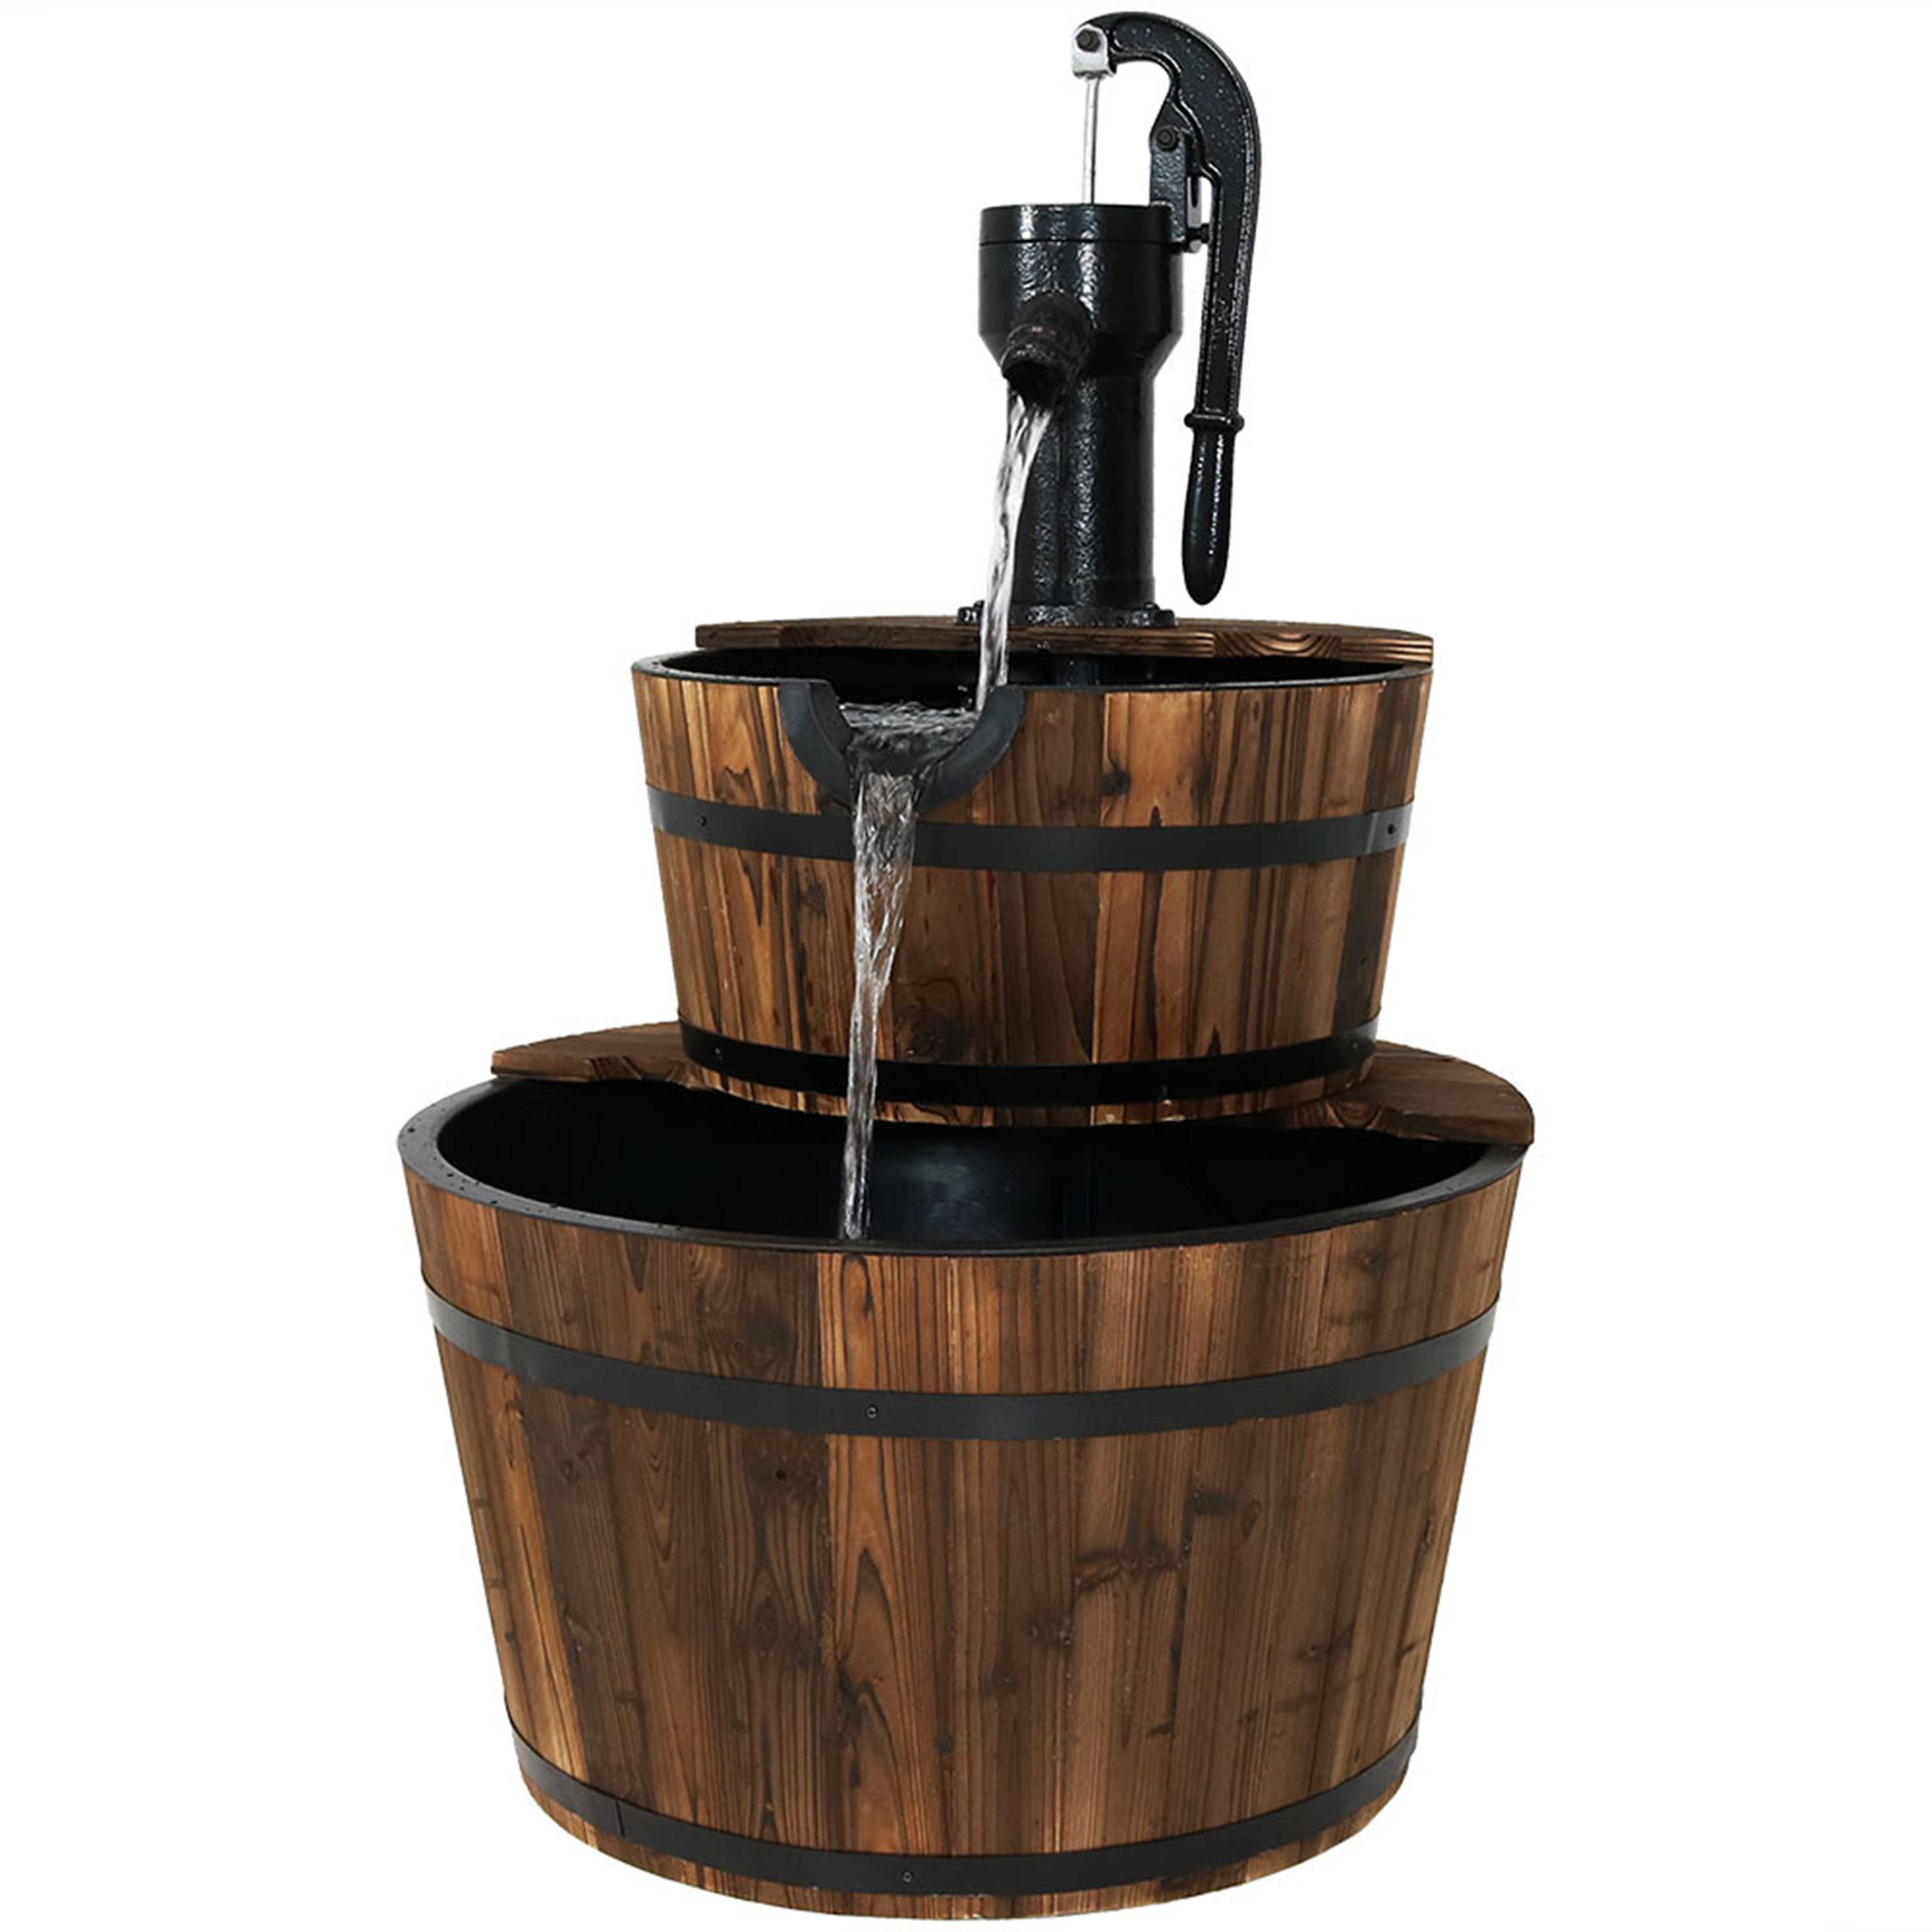 Sunnydaze Rustic 2-Tier Wood Barrel Water Fountain with Hand Pump - 34-Inch